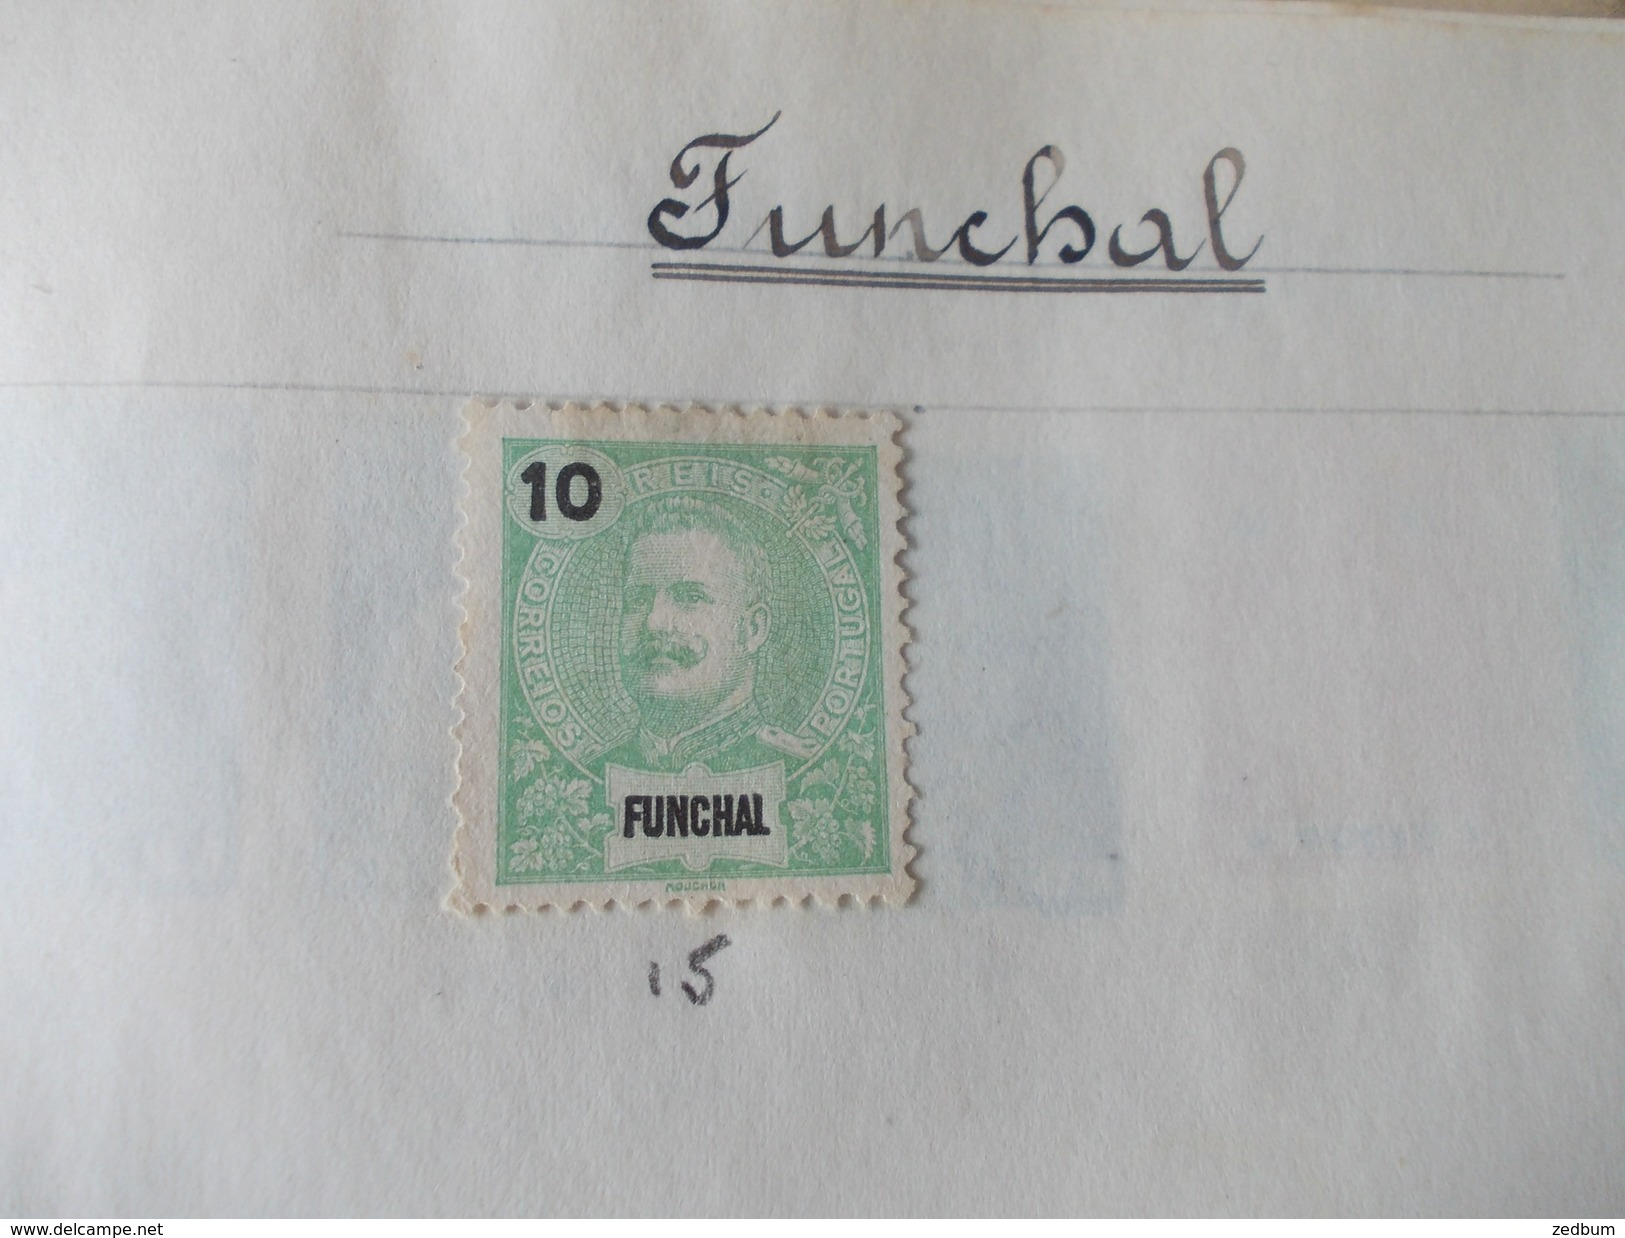 TIMBRE 5 Pages Funchal Guinée Portugaise Inde Hyderabad Hong Kong 12 Timbres Valeur 3.55 &euro; - Portuguese Guinea